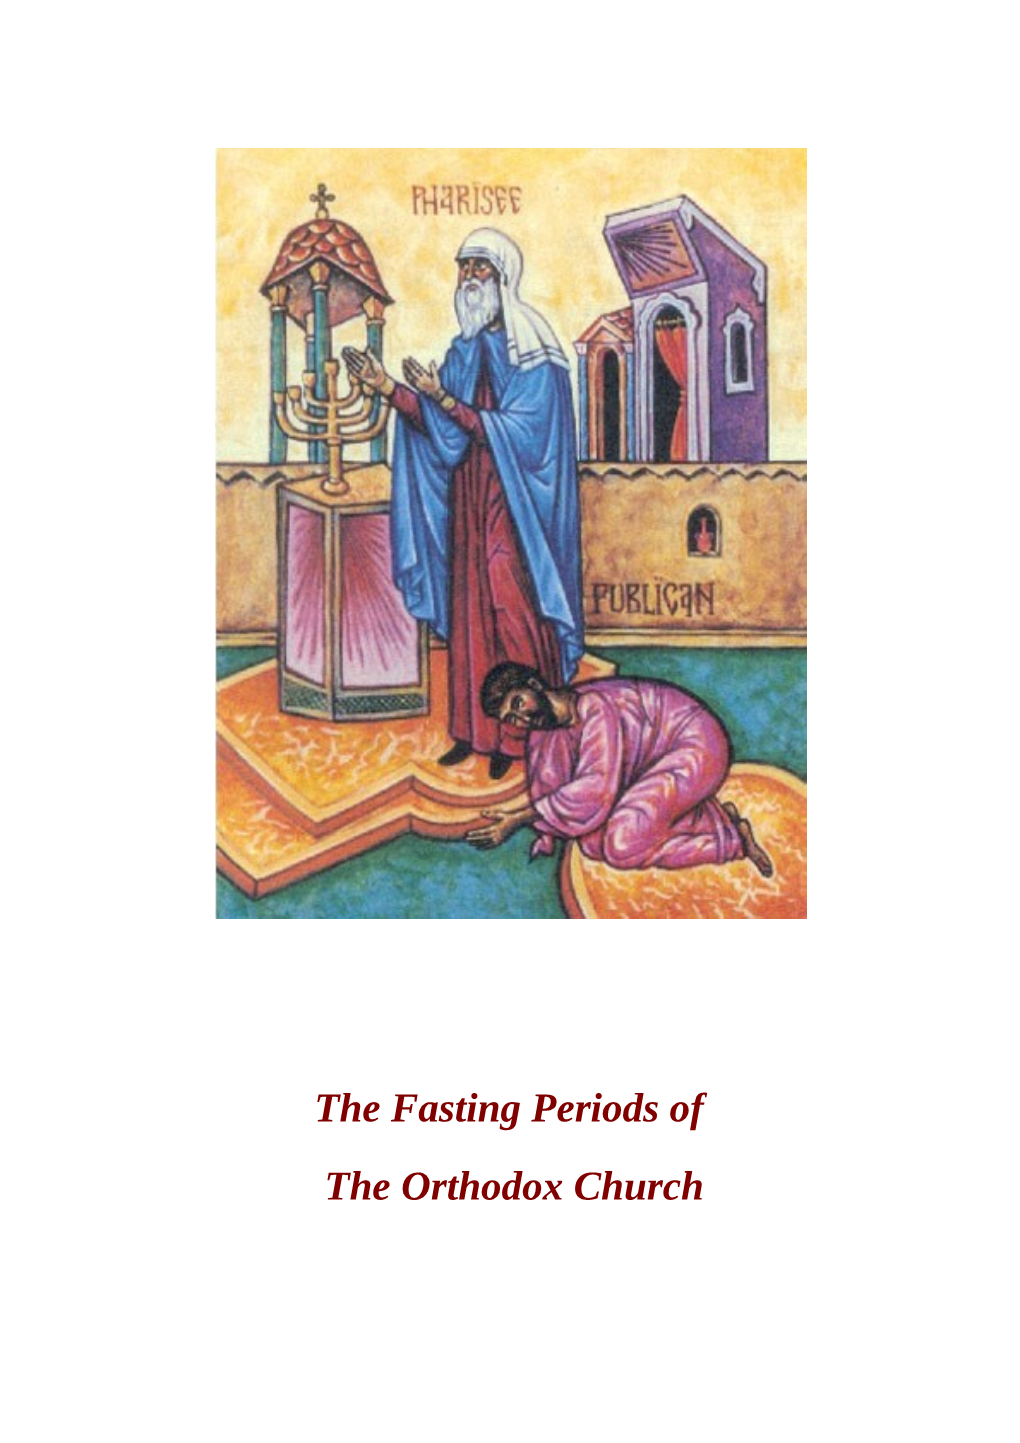 The Fasting Periods of the Orthodox Church the Fasting Periods of the Orthodox Church